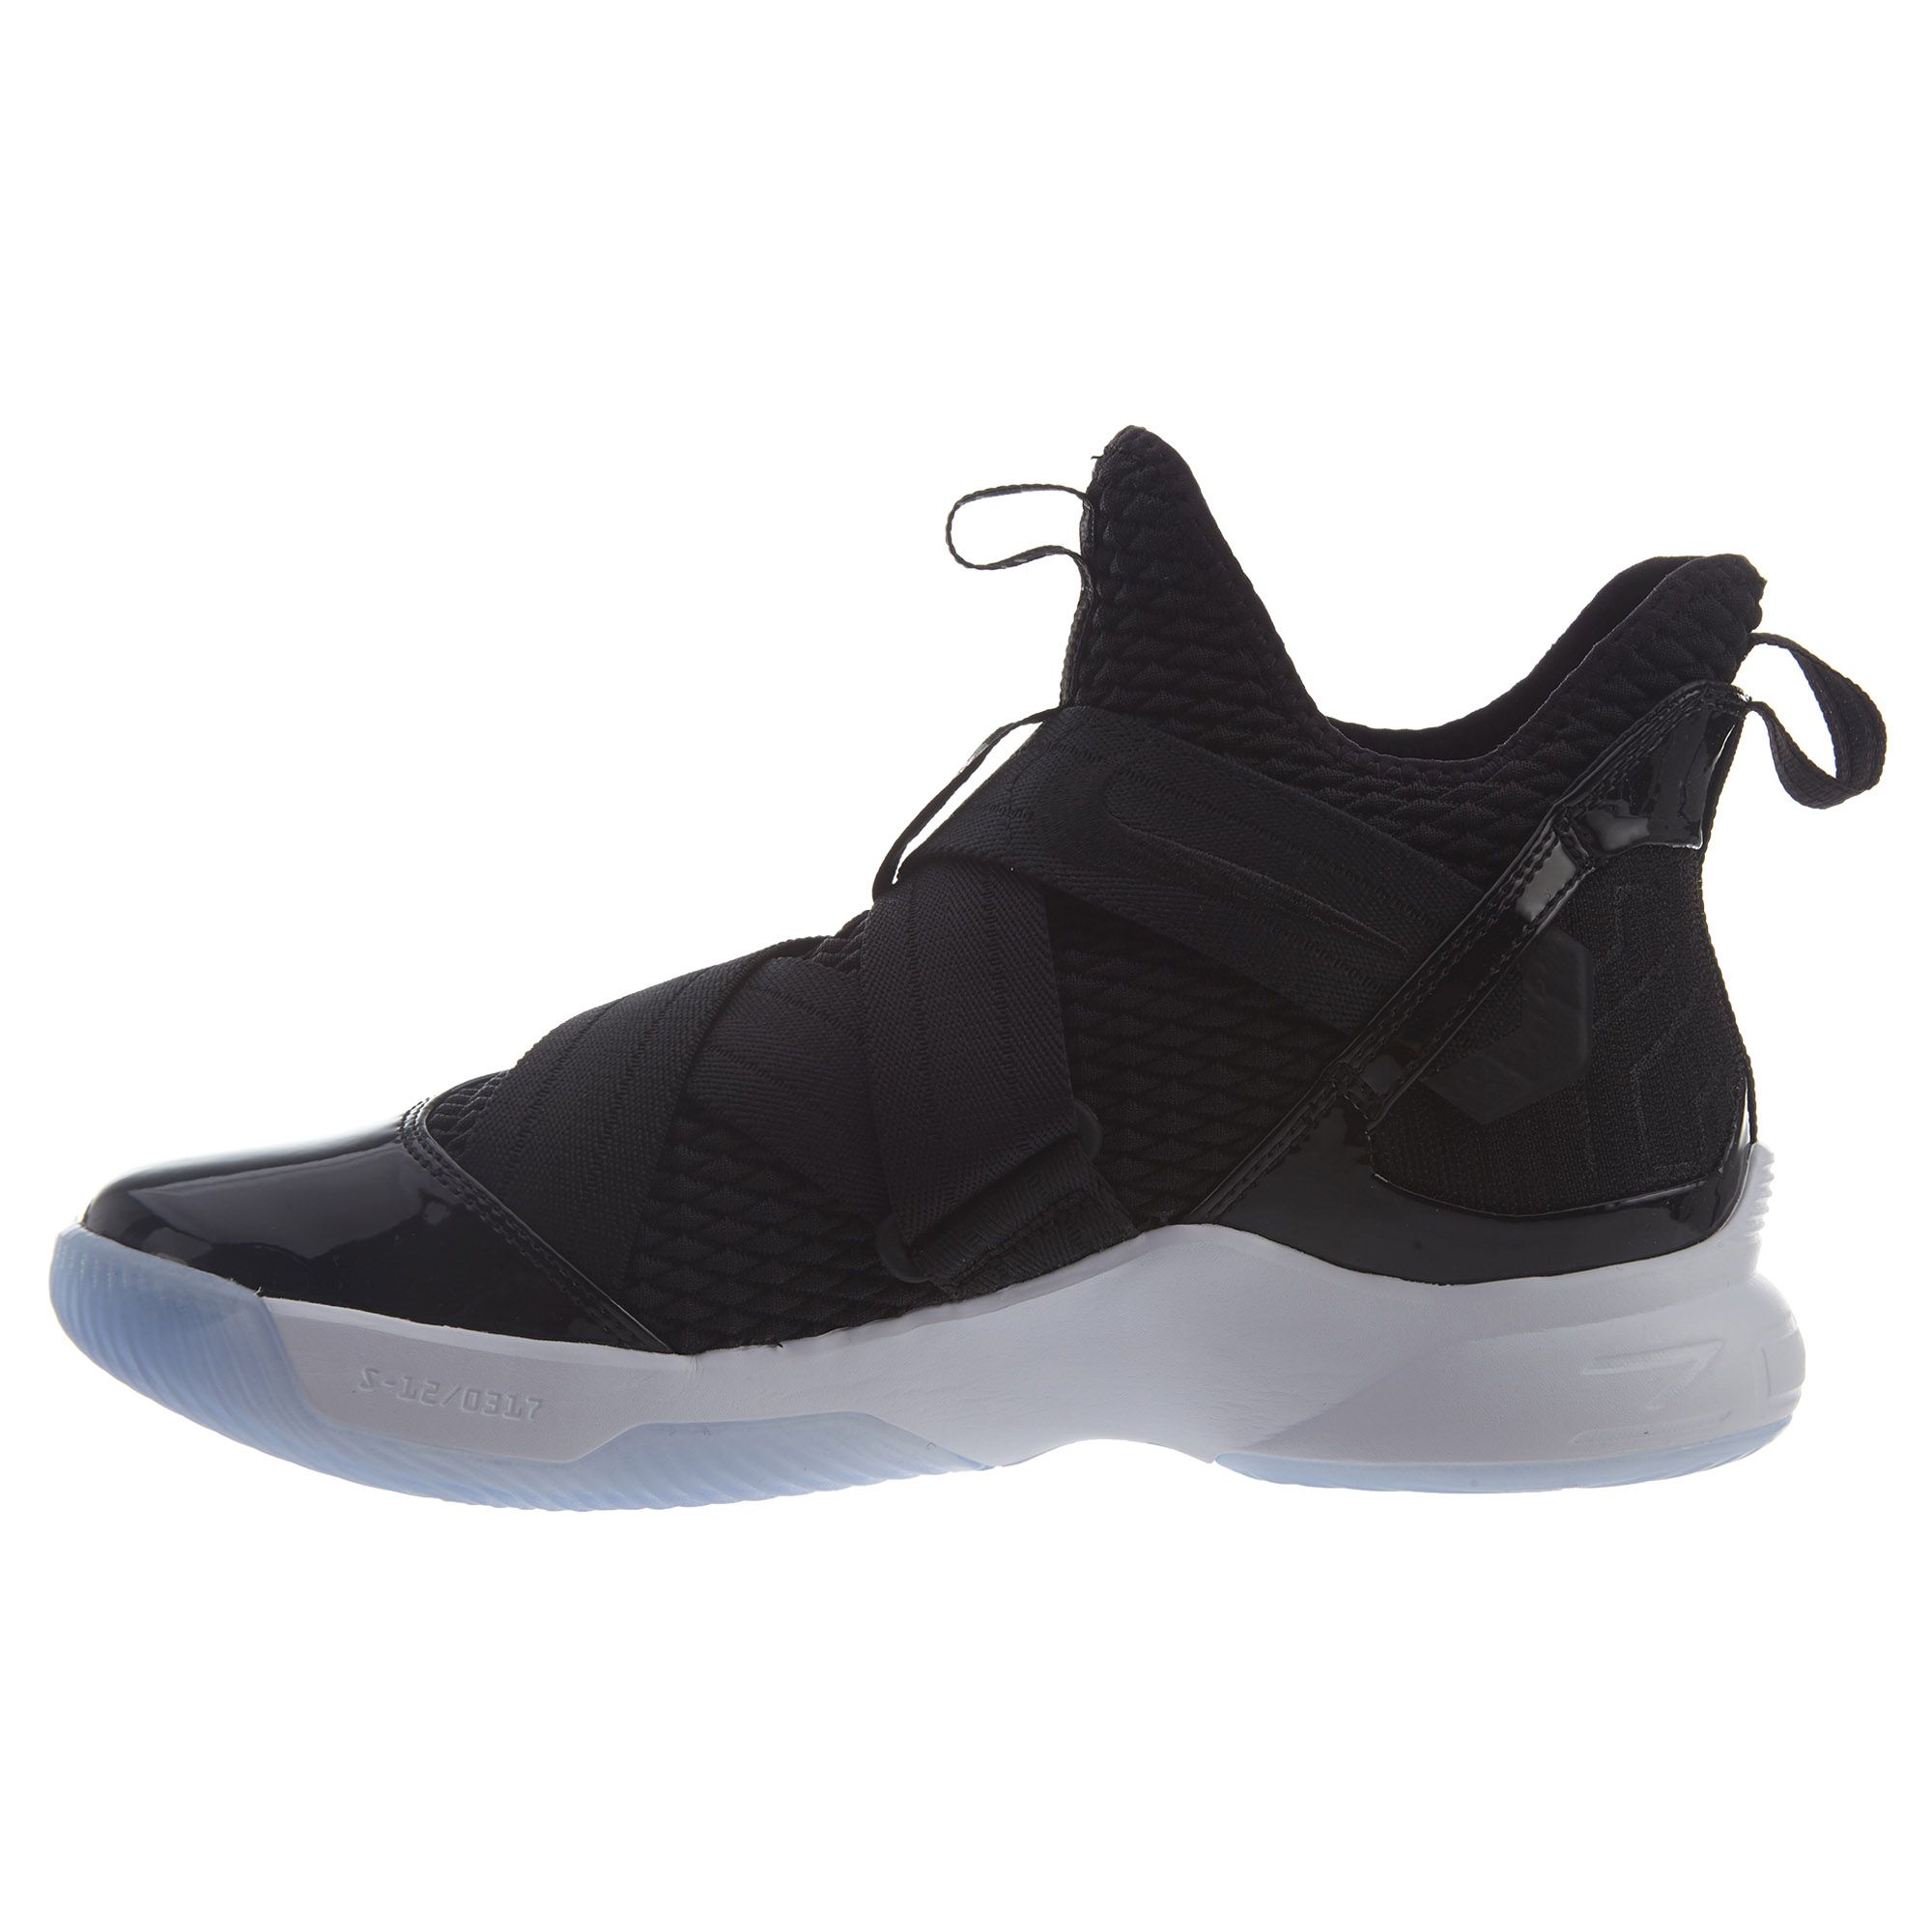 nike lebron soldier xii sfg mens style